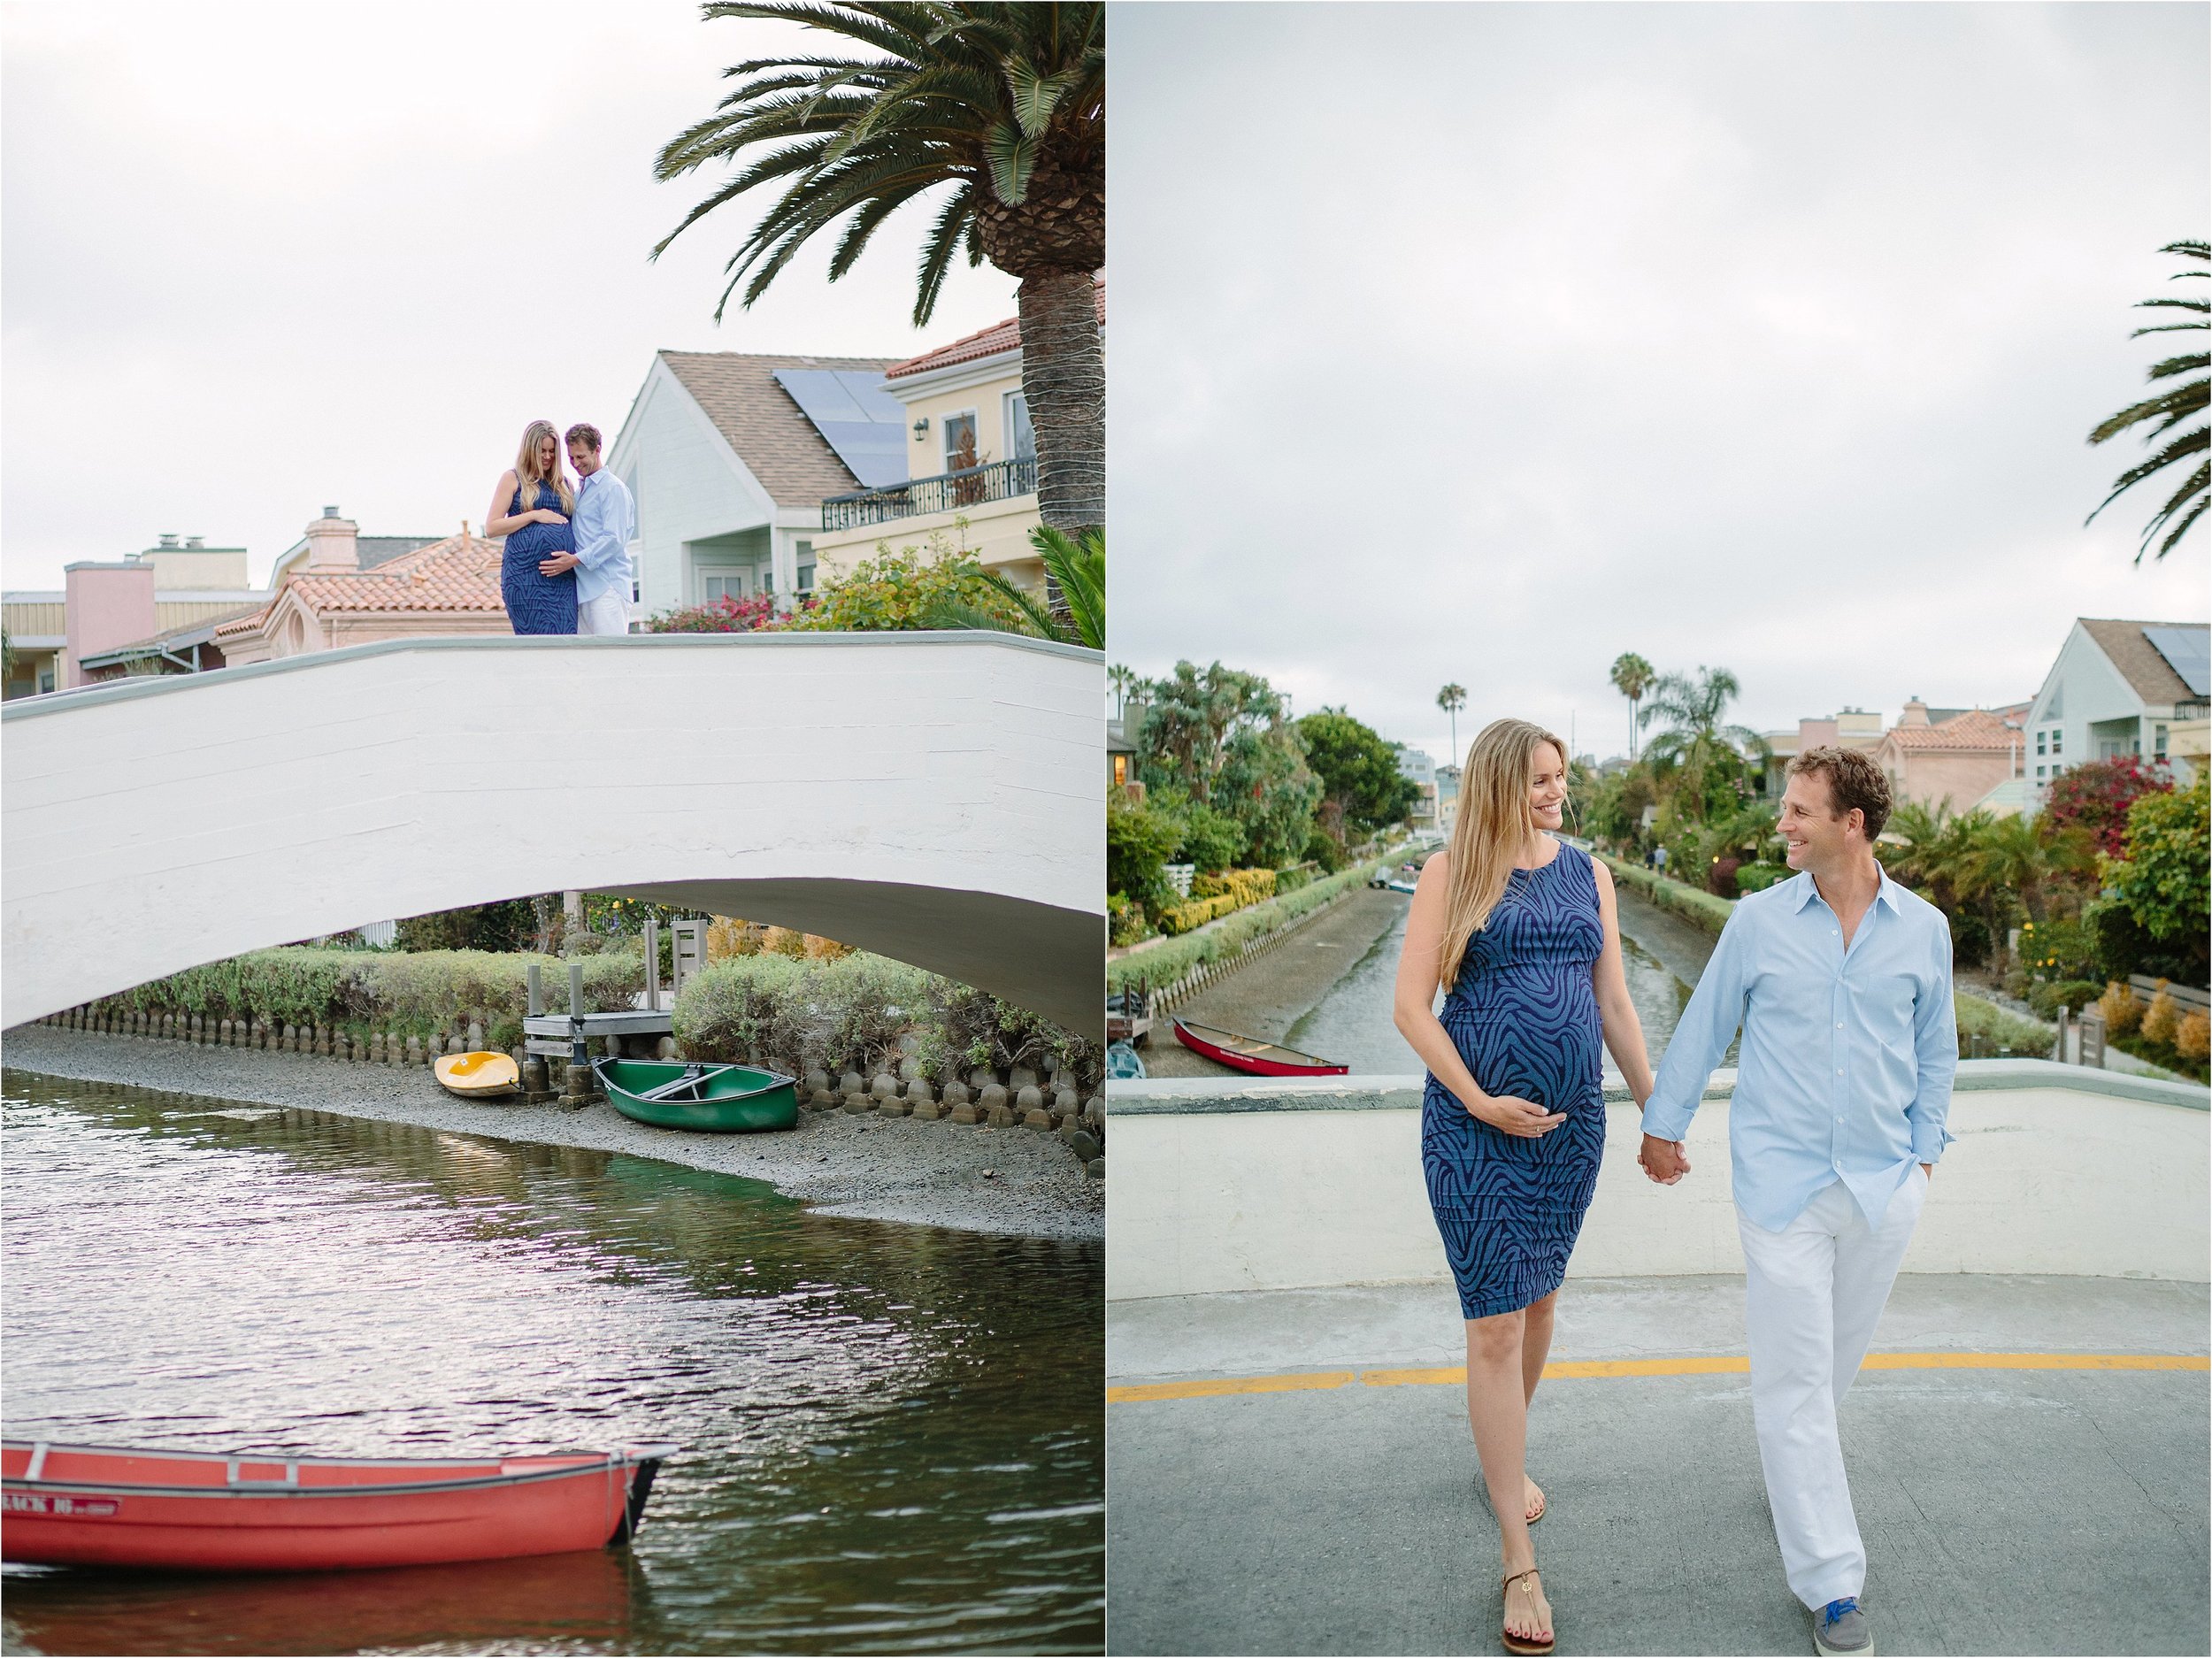 Venice Canals Natural Light Maternity Photo